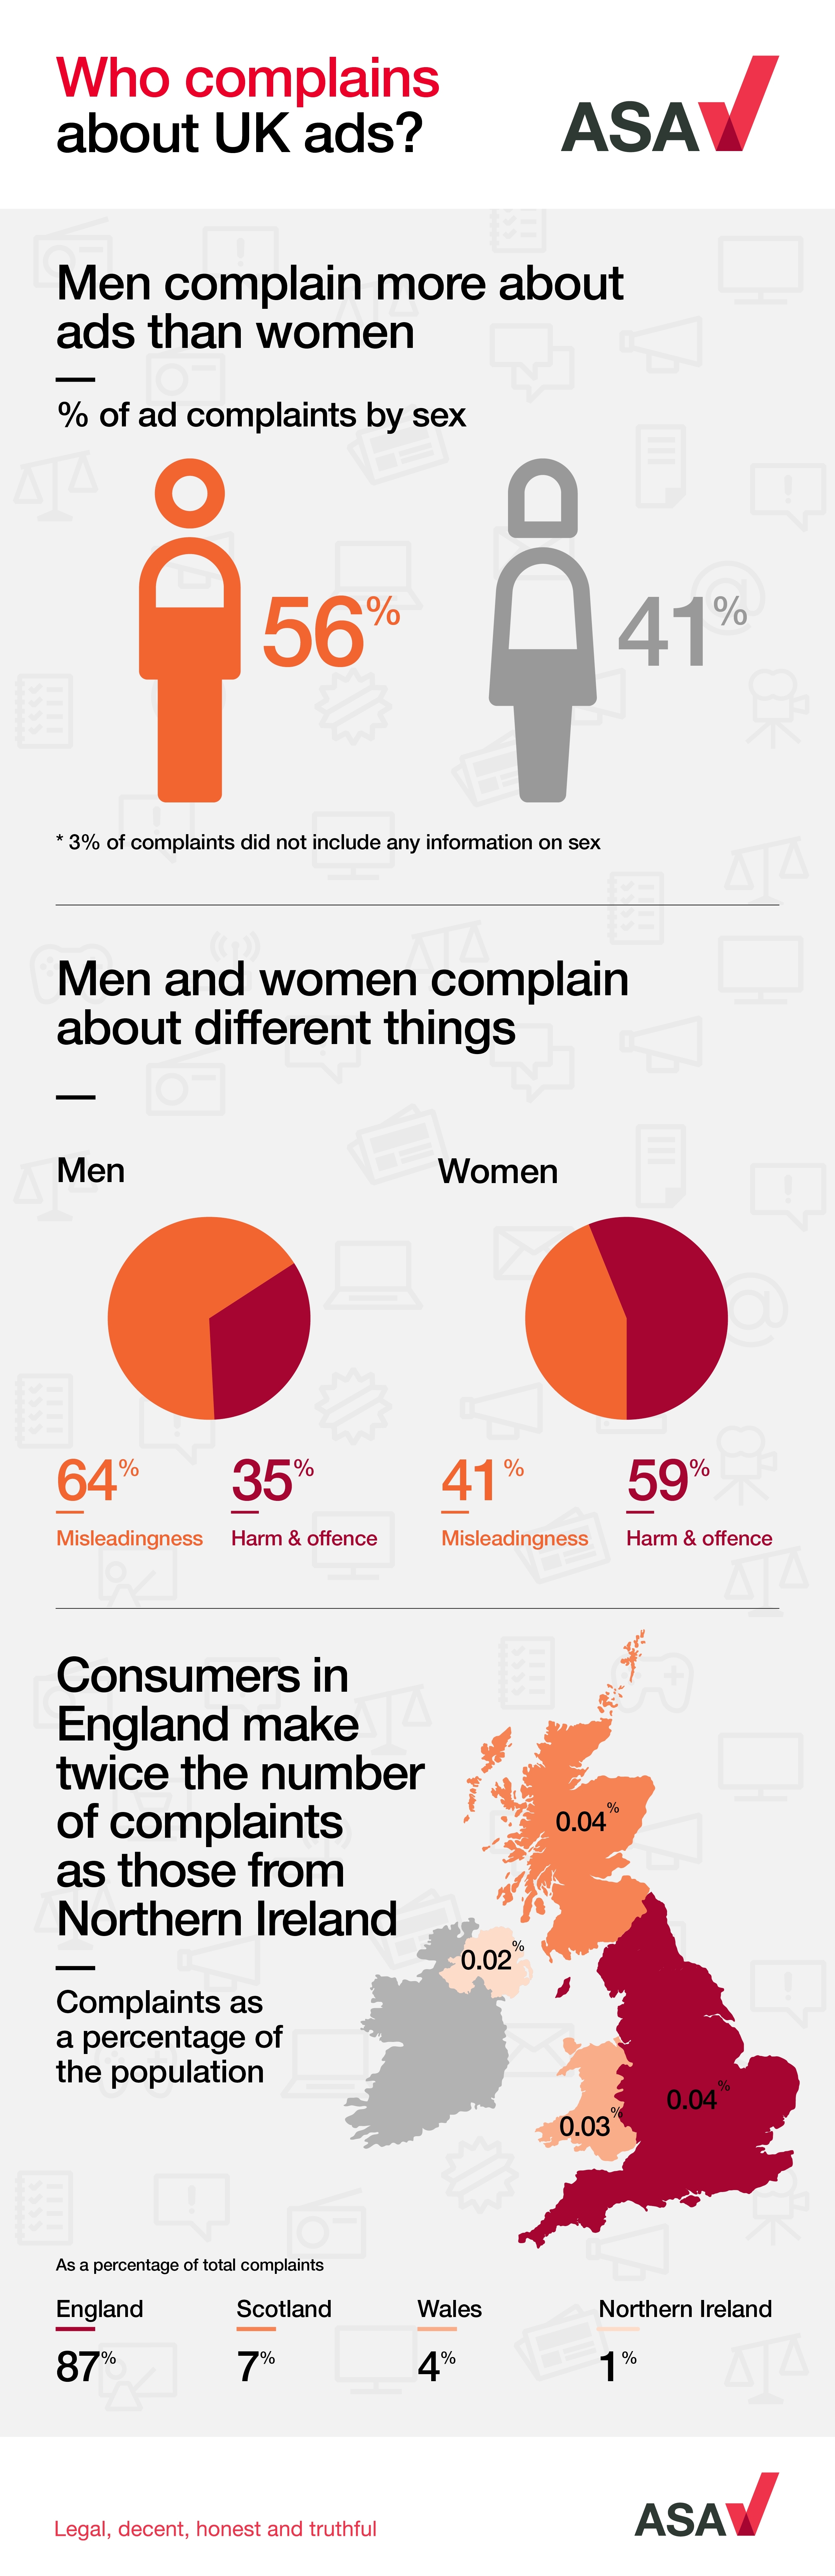 Complaints about UK ads 2016 infographic